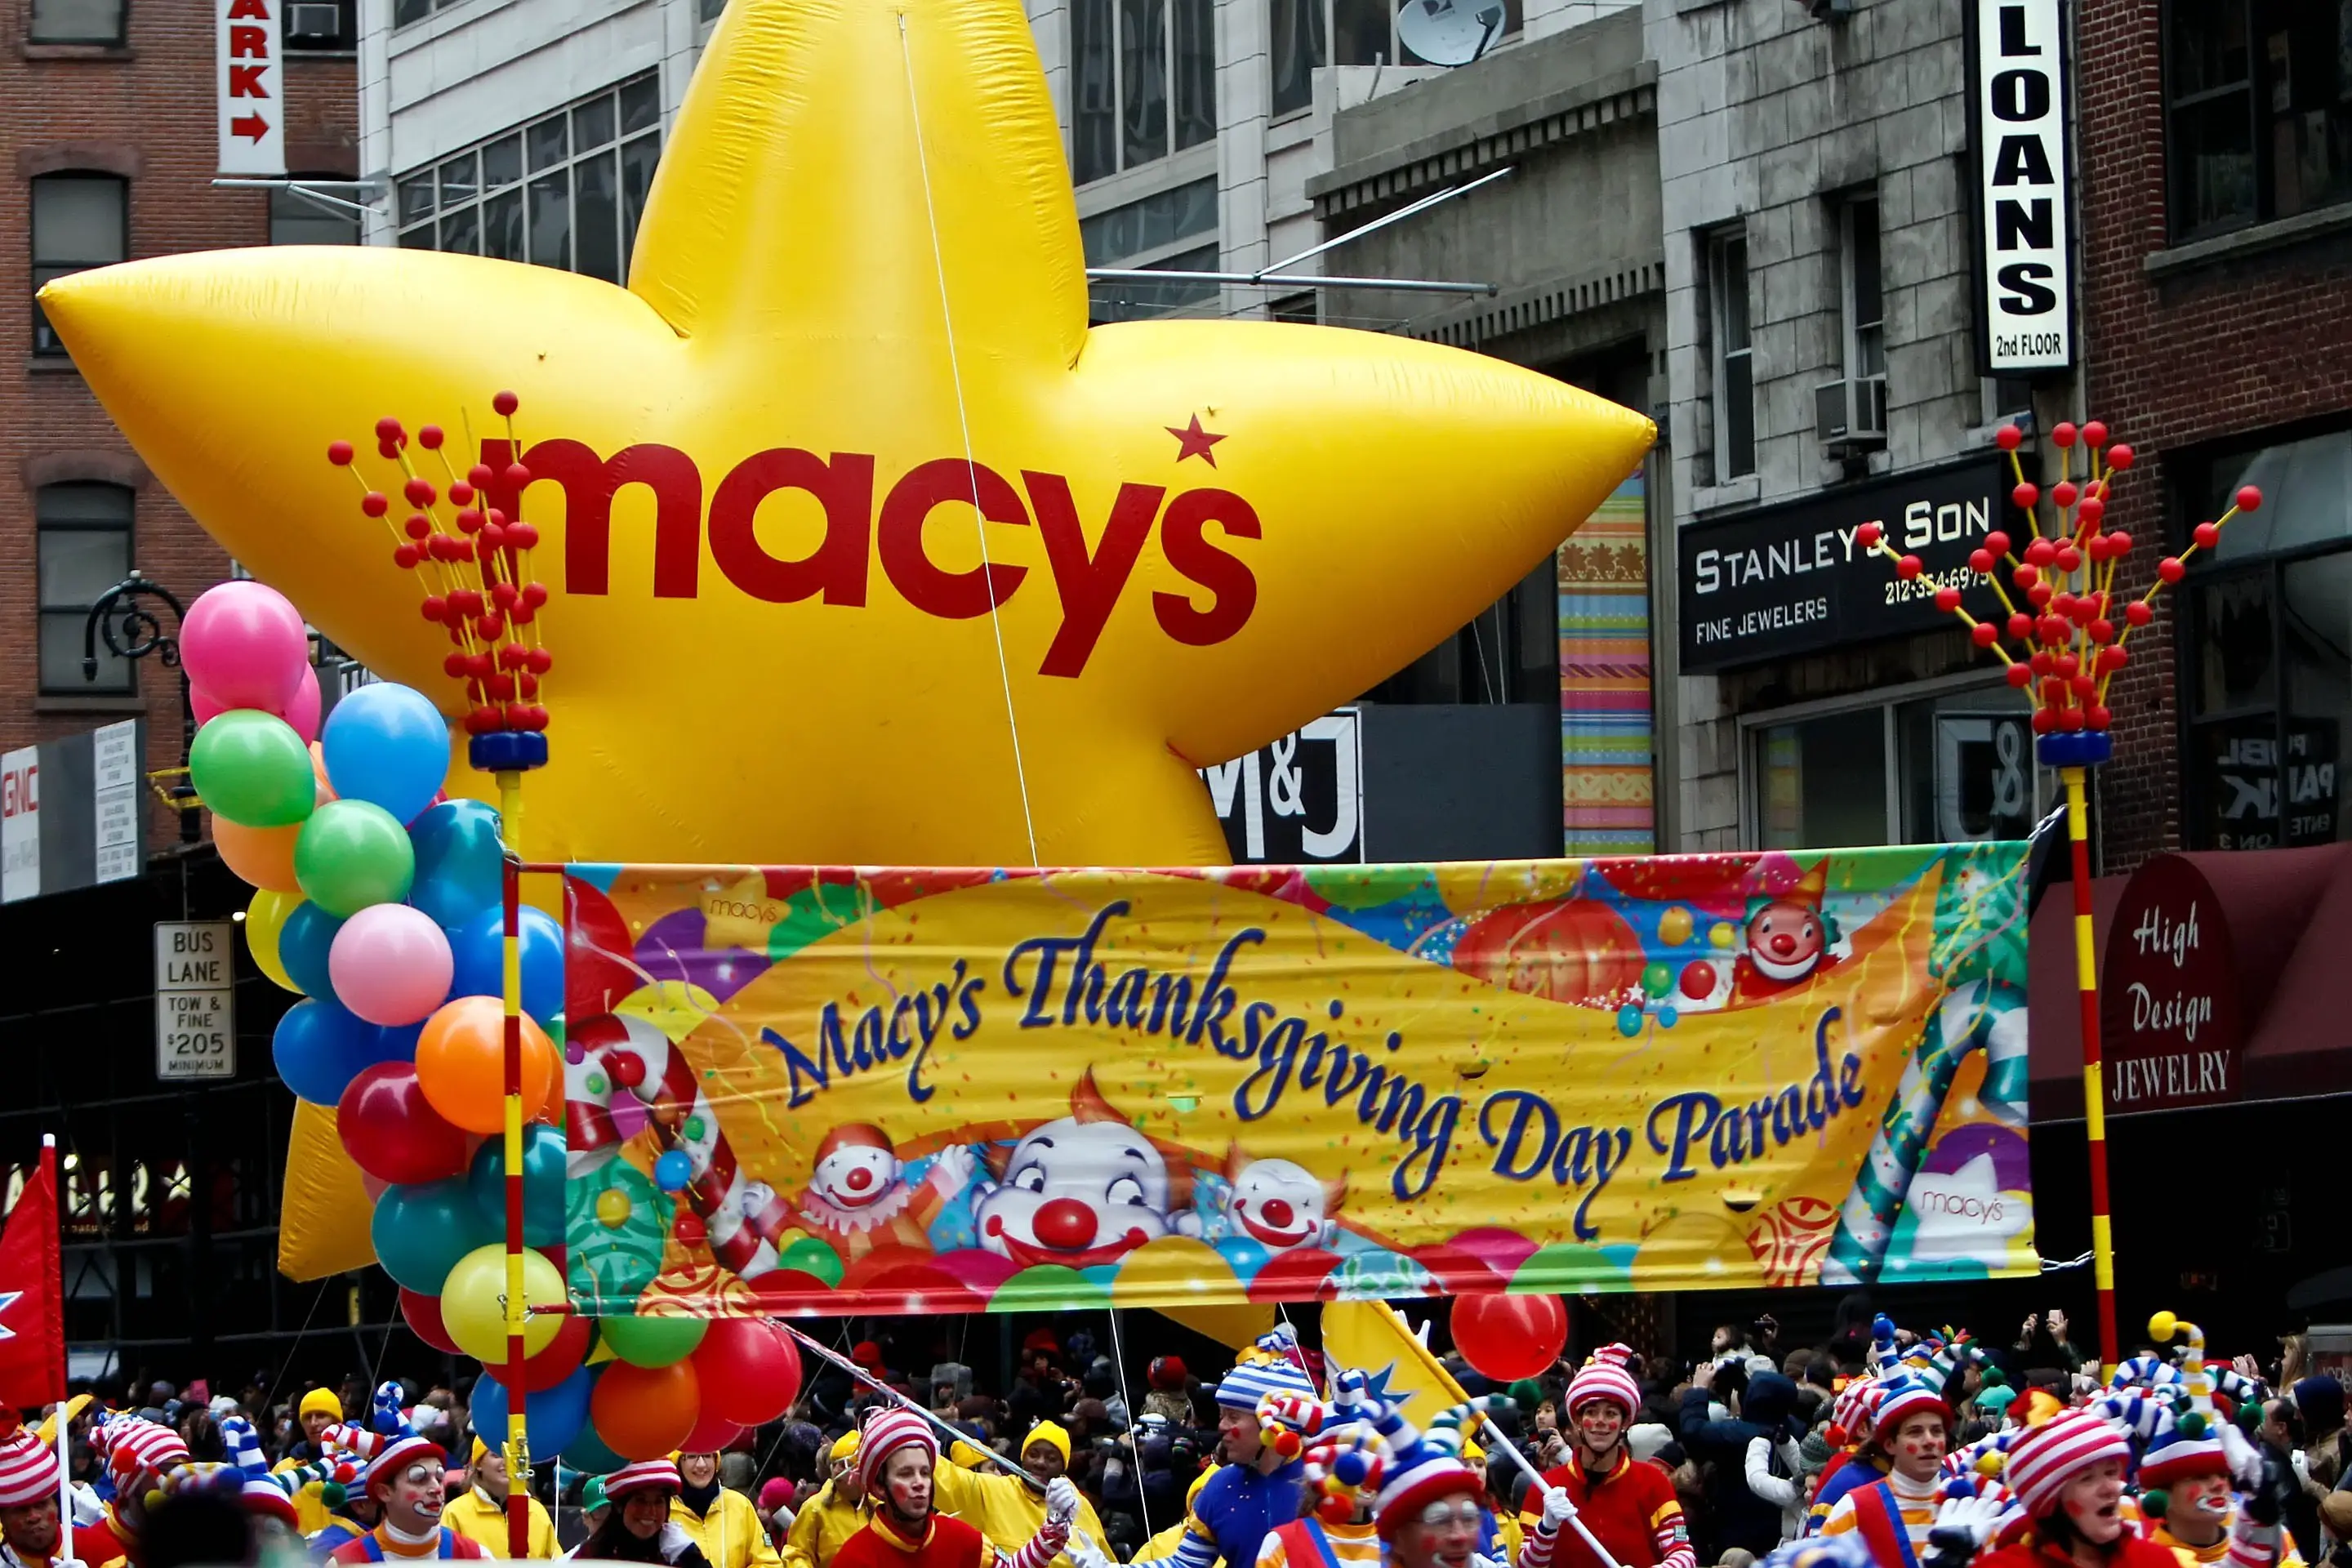 Enter for your chance to win a trip to the Macy's Thanksgiving Day Parade in New York City